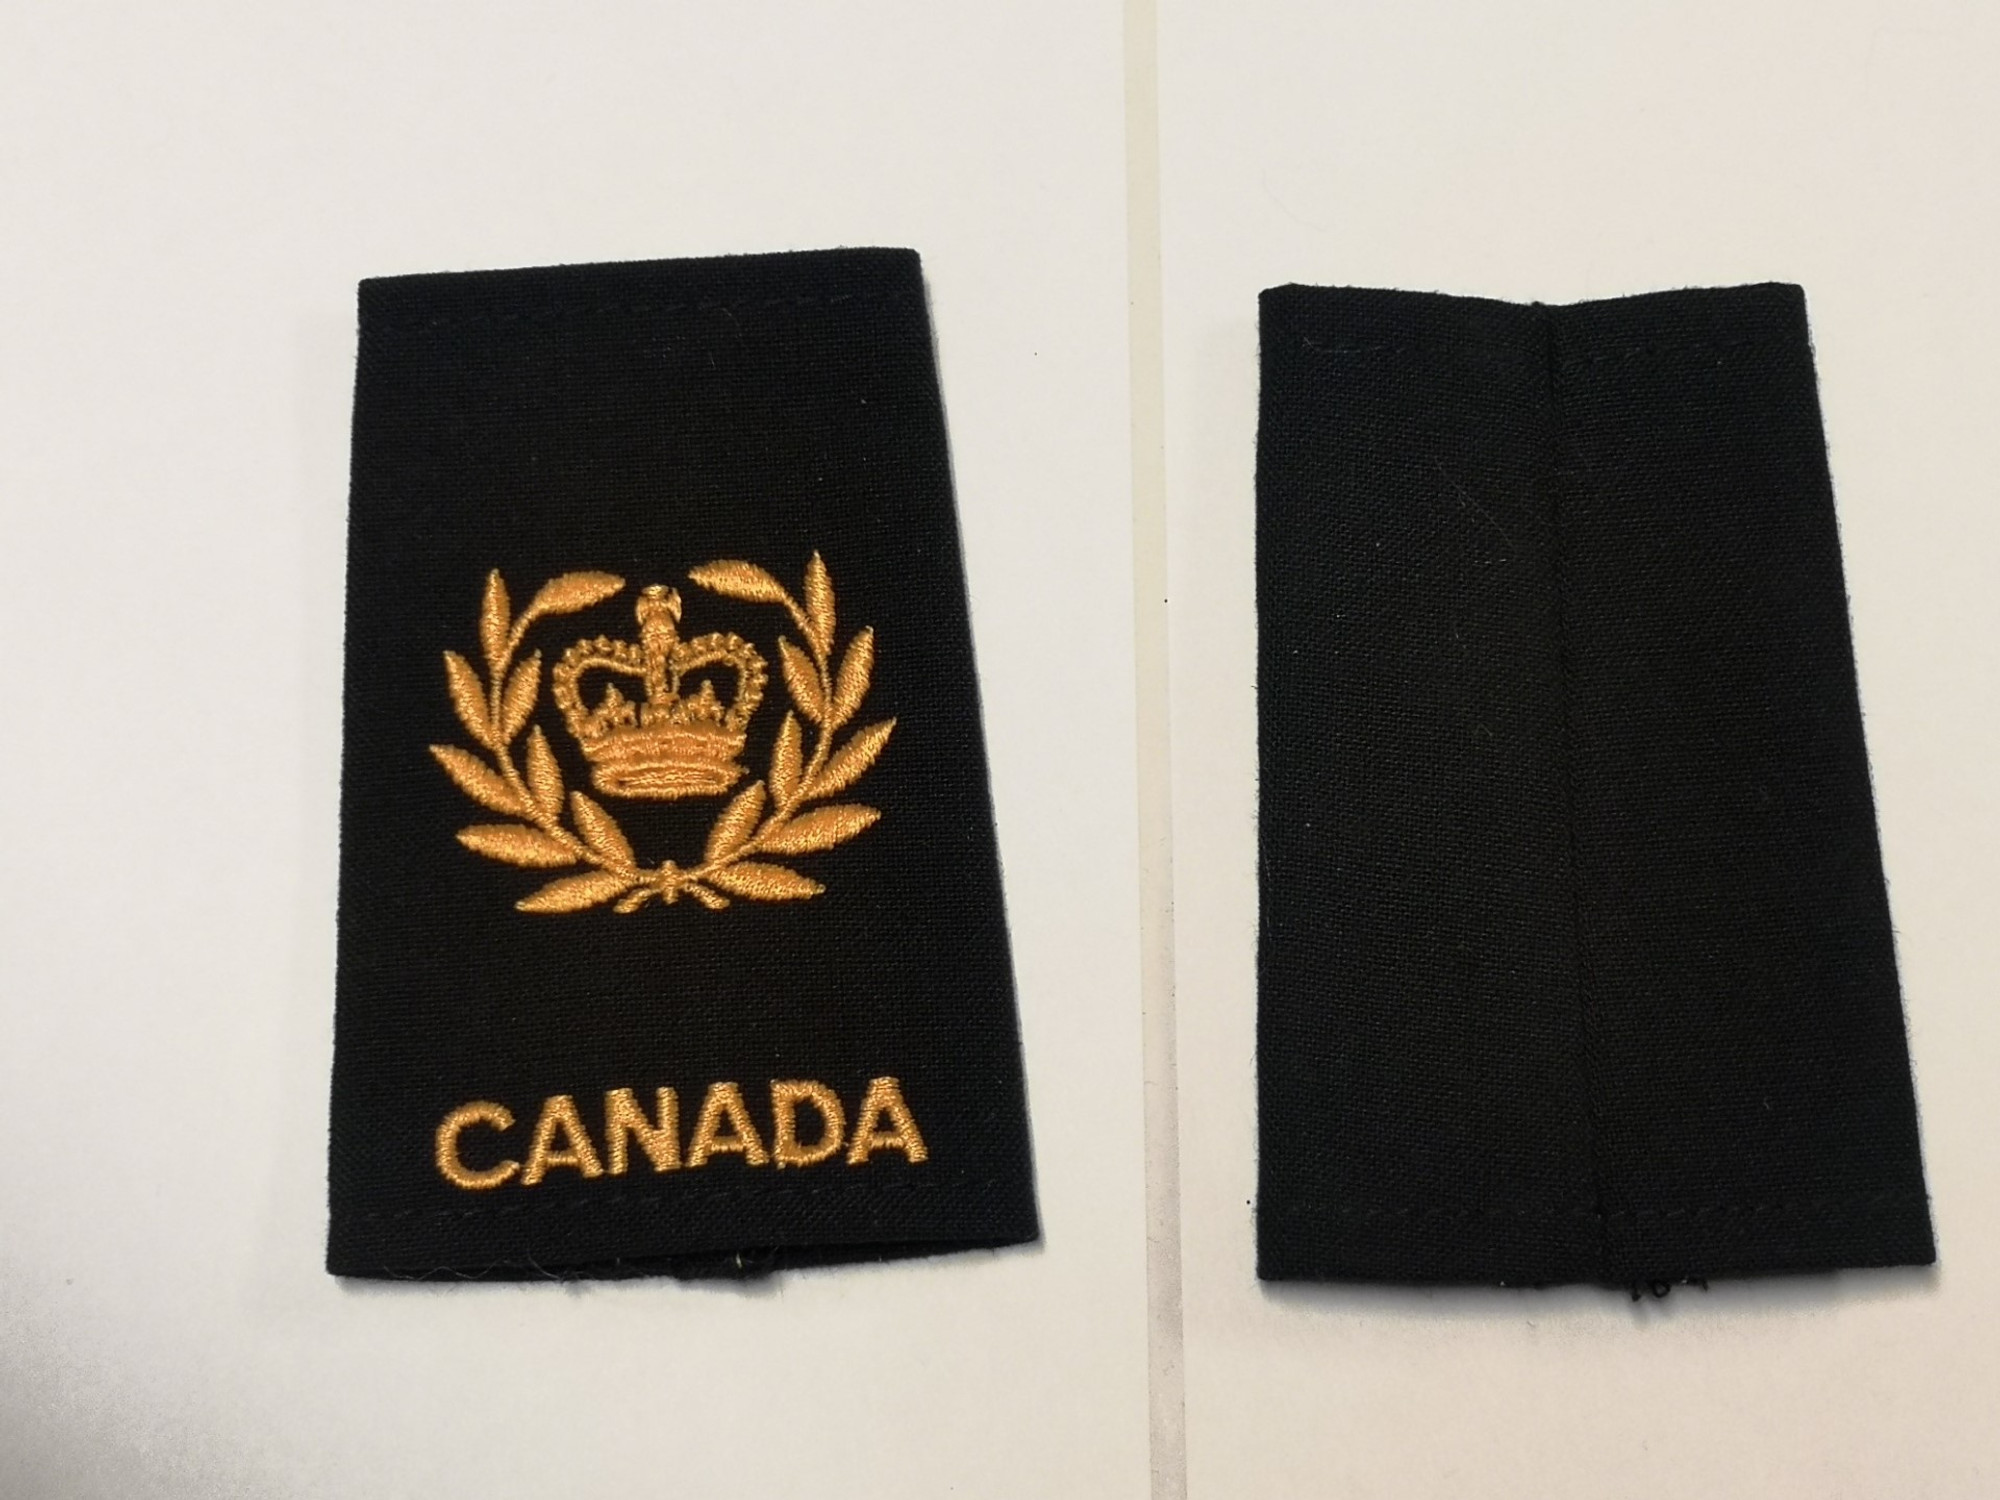 Canadian Armed Forces Rank Epaulets Navy - Chief Petty Officer, 2nd Class